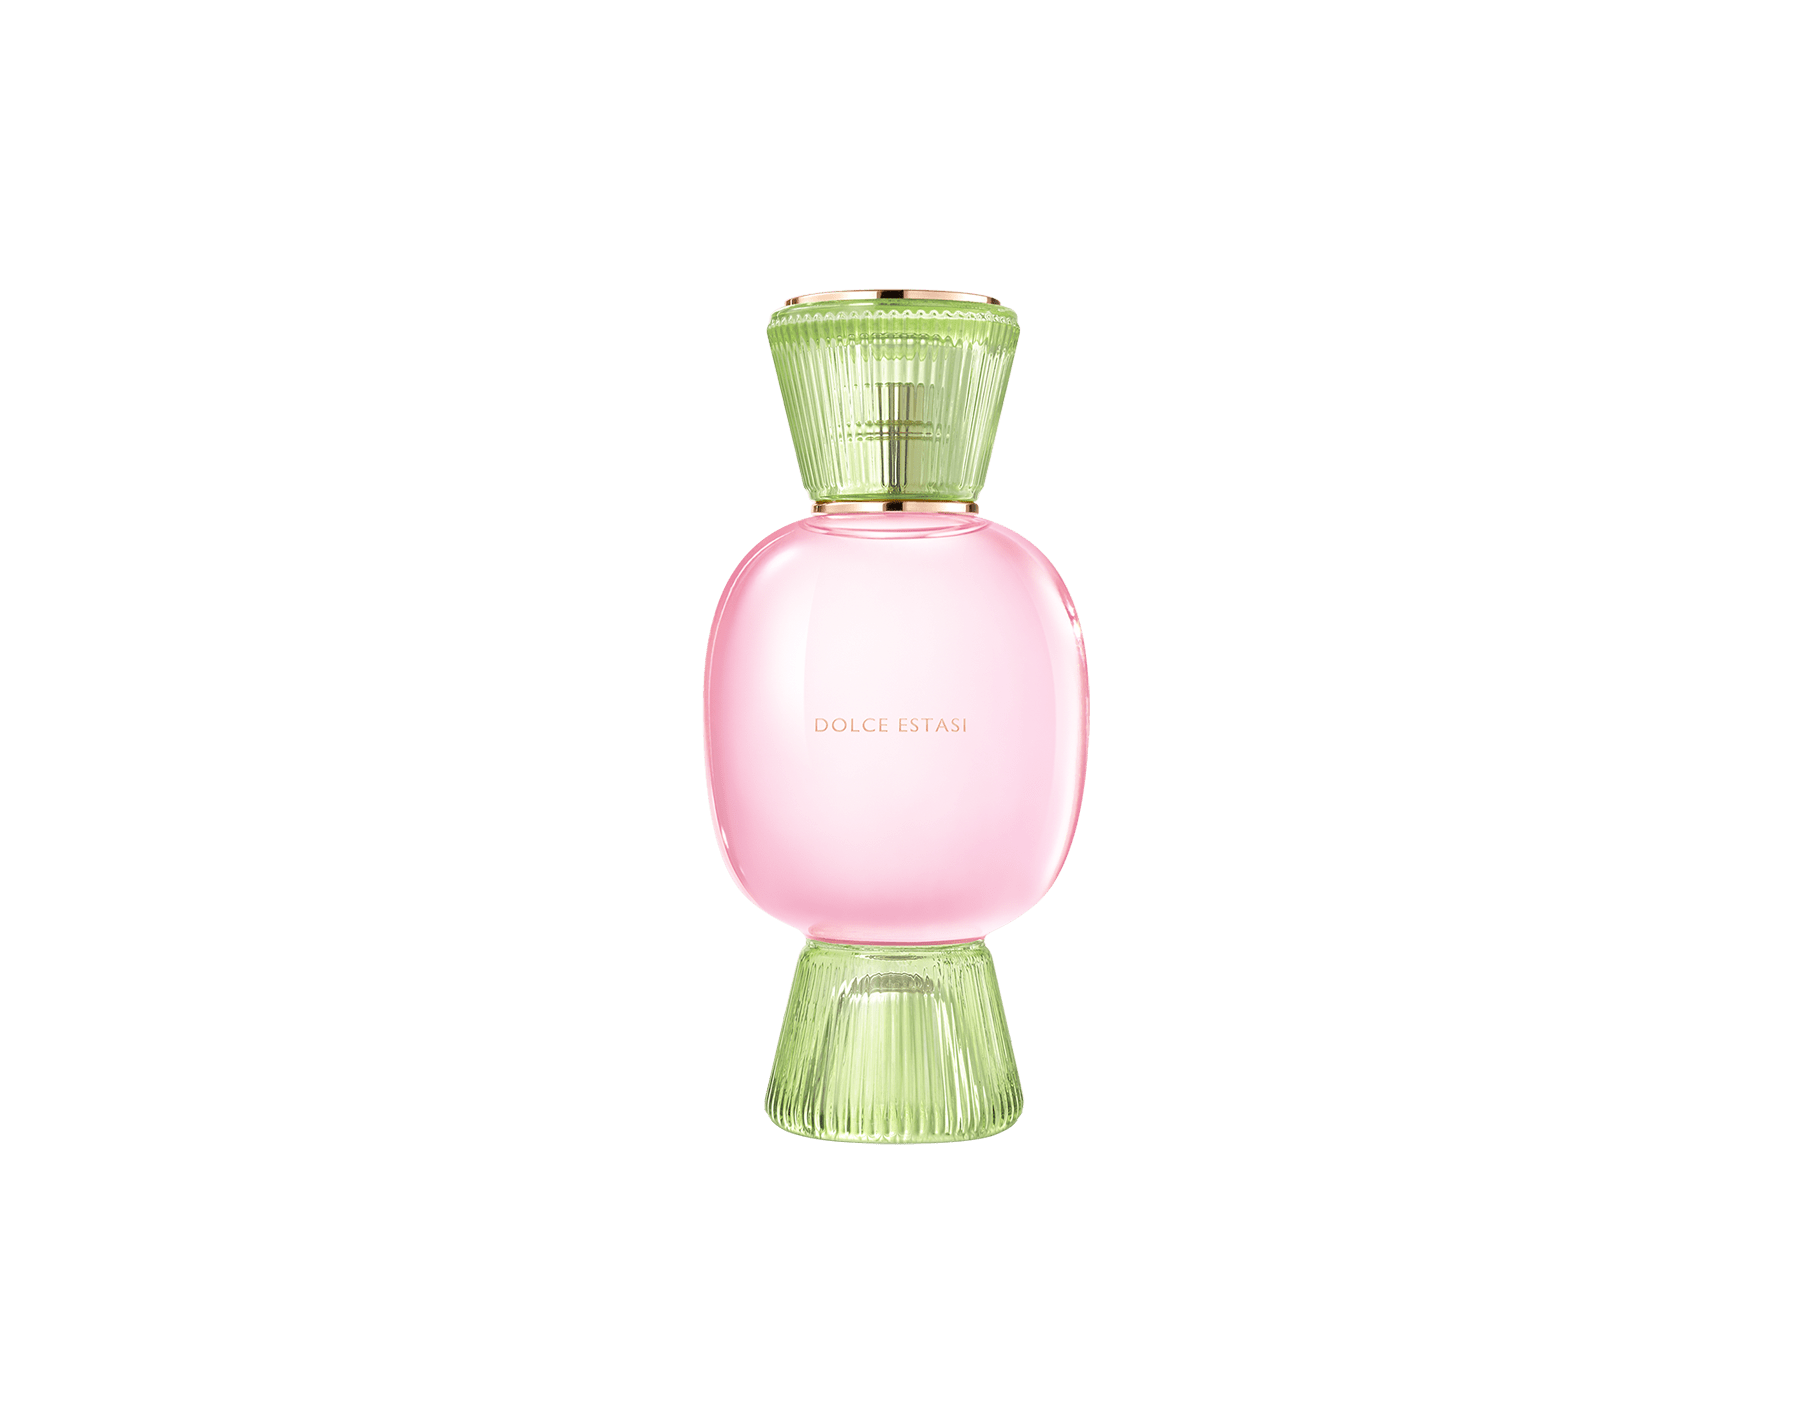 “It is the celebration of sweetness, of the Italian family cocoon.” Jacques Cavallier A soothing powdery floral, reminiscent of sweet memories of Italian pastries 41240 image 1